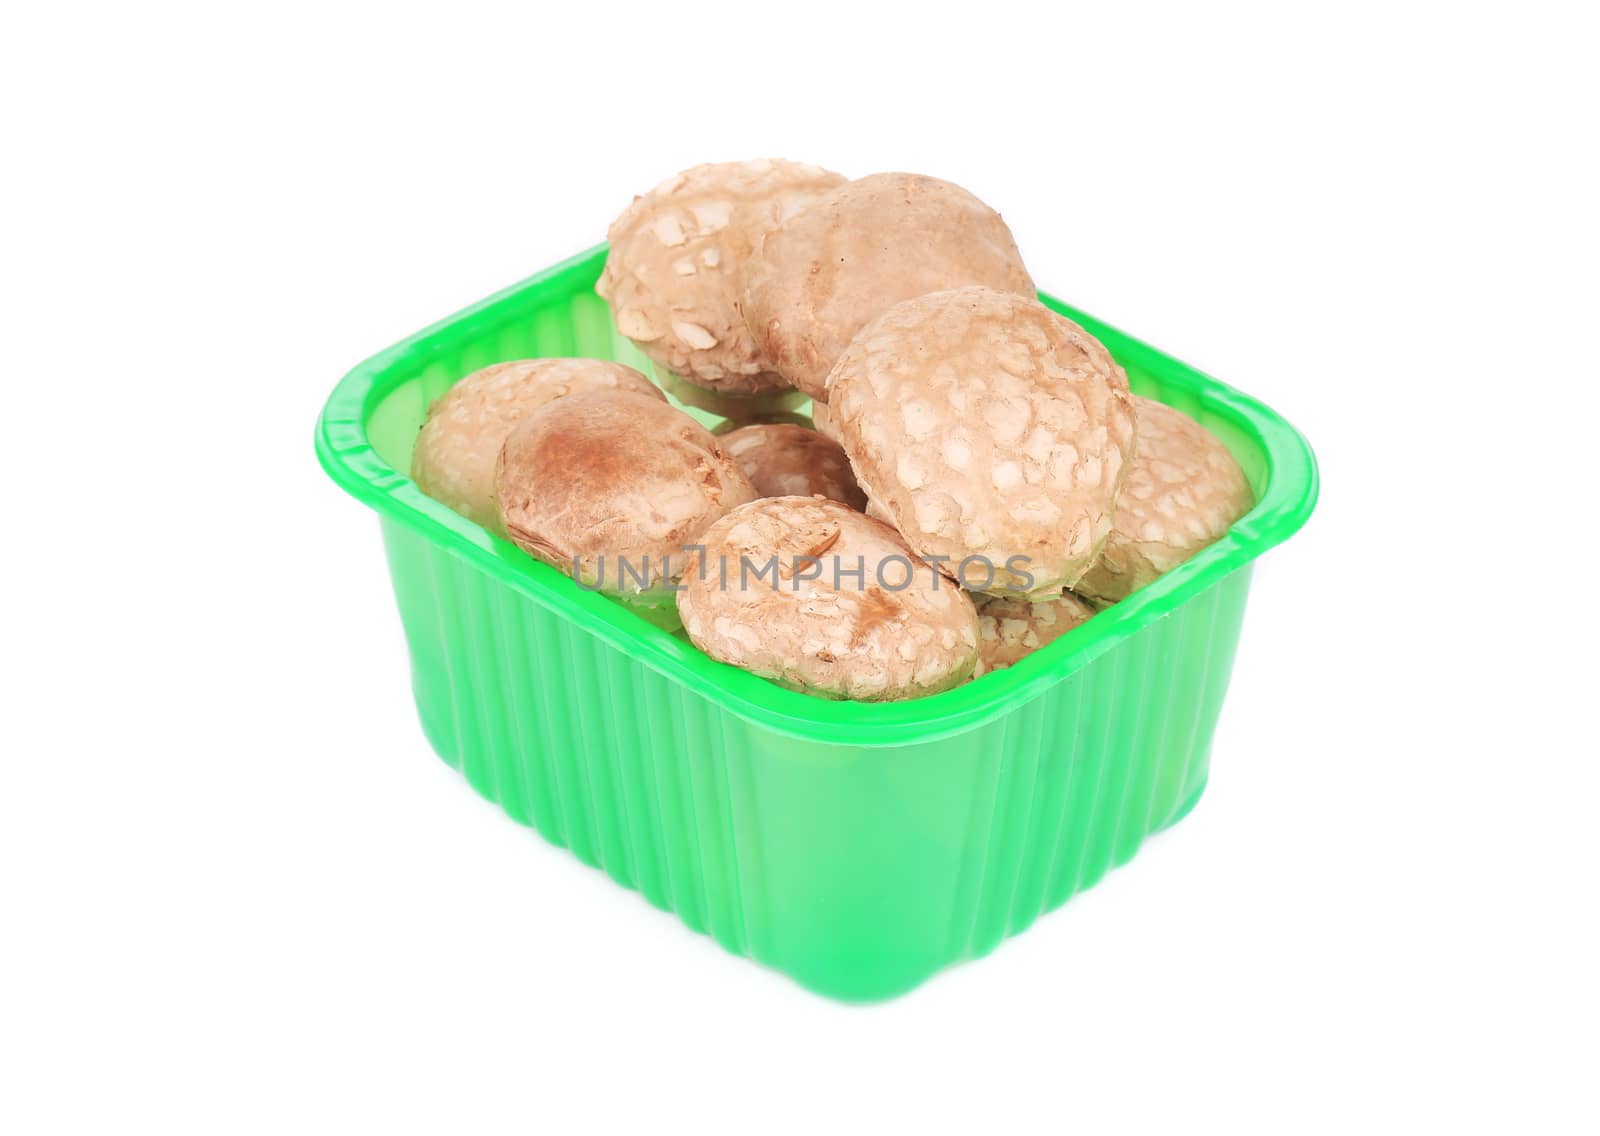 Plastic box with champignons. Isolated on a white background.